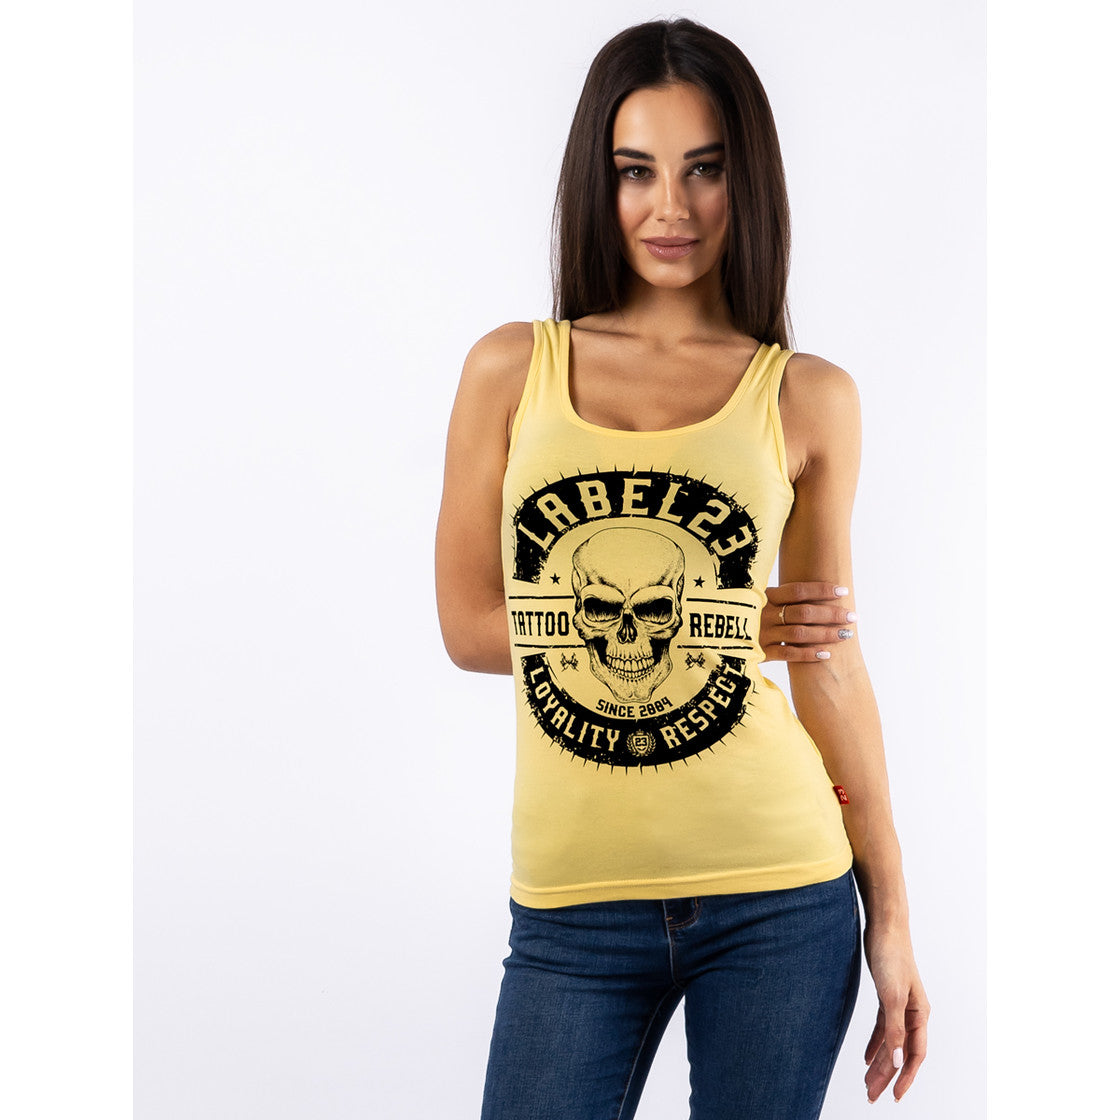 Tanktop "Tattoo Rebell" no-limit-fitness-and-fight-shop.myshopify.com